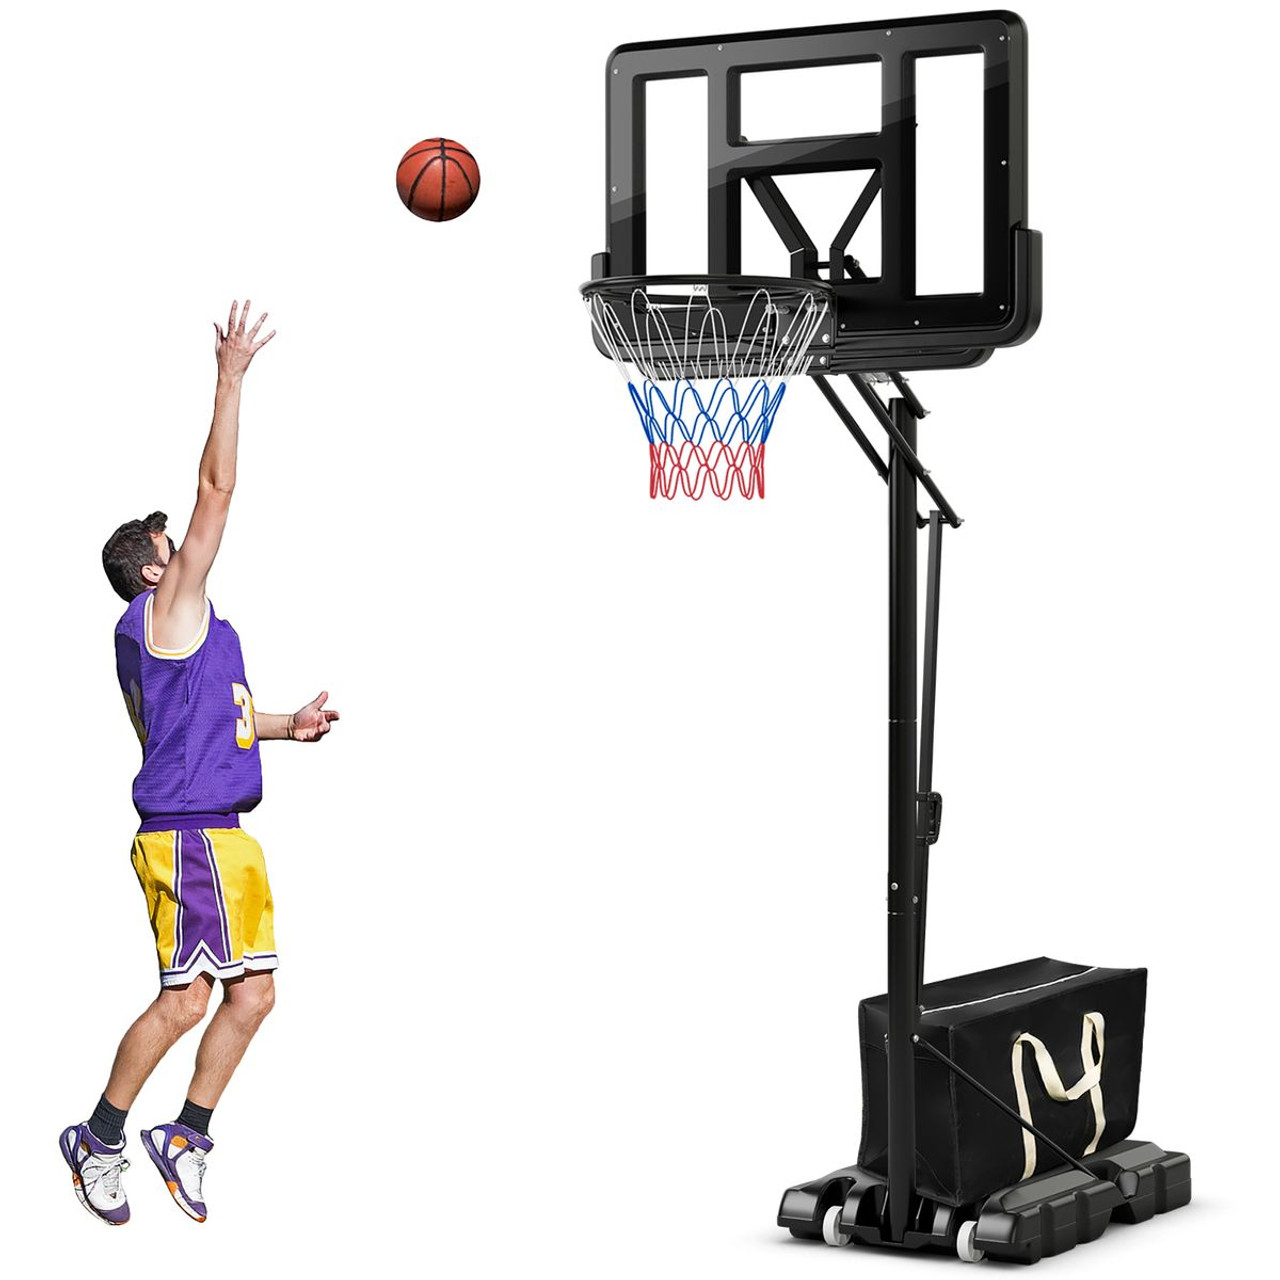 Portable 8 to 10-Foot 5-Level Adjustable Basketball Hoop product image